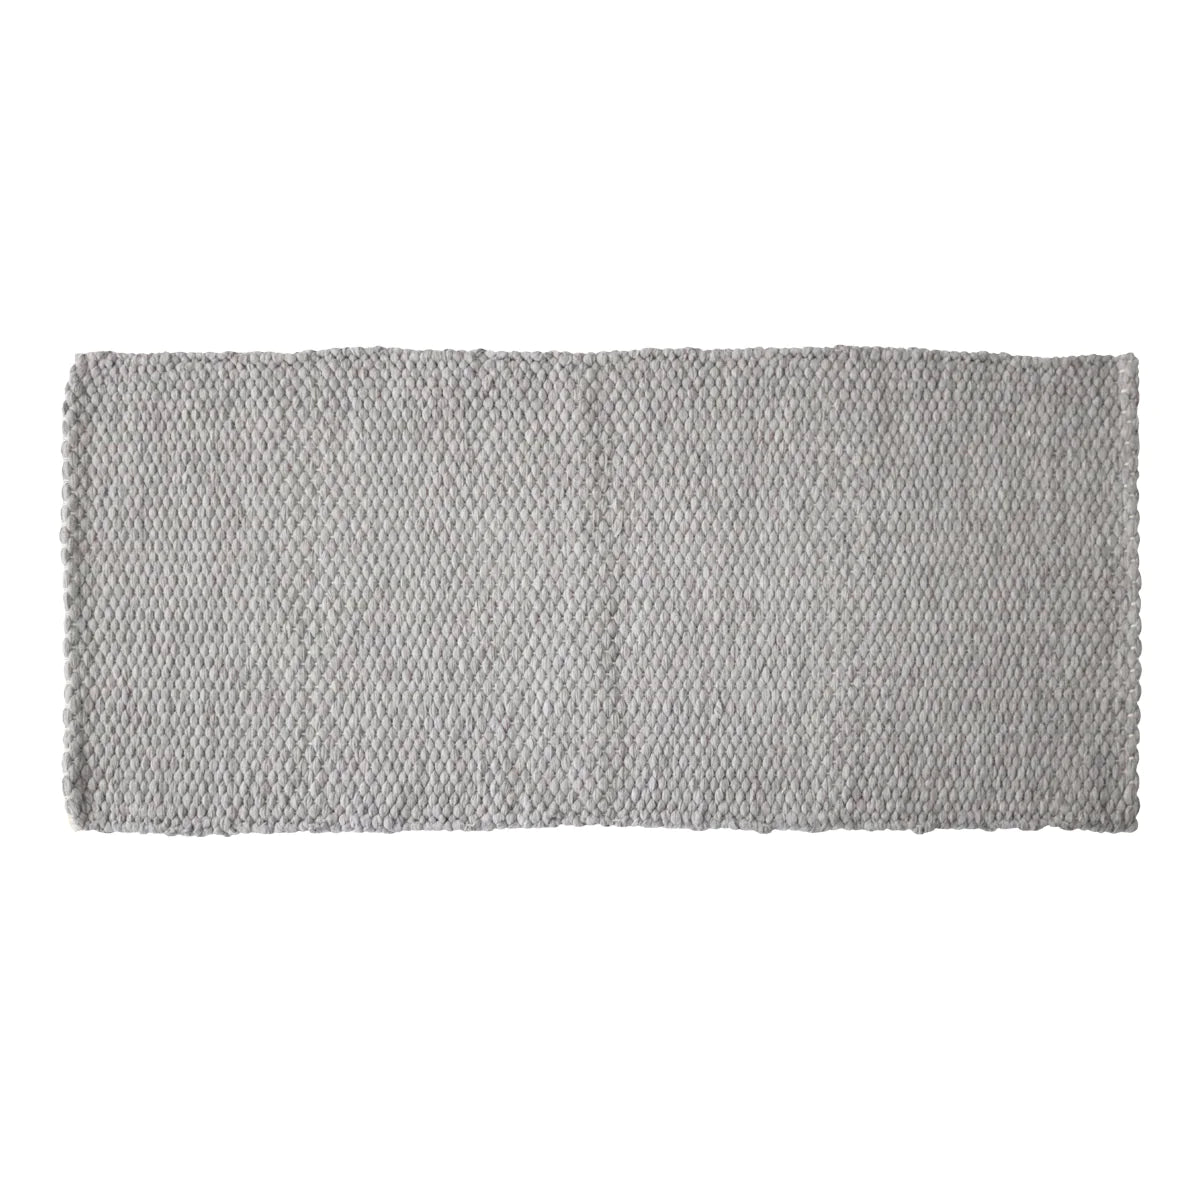 Deocriste Sustainable Rug Handwoven From Upcycled Fibers in Grey